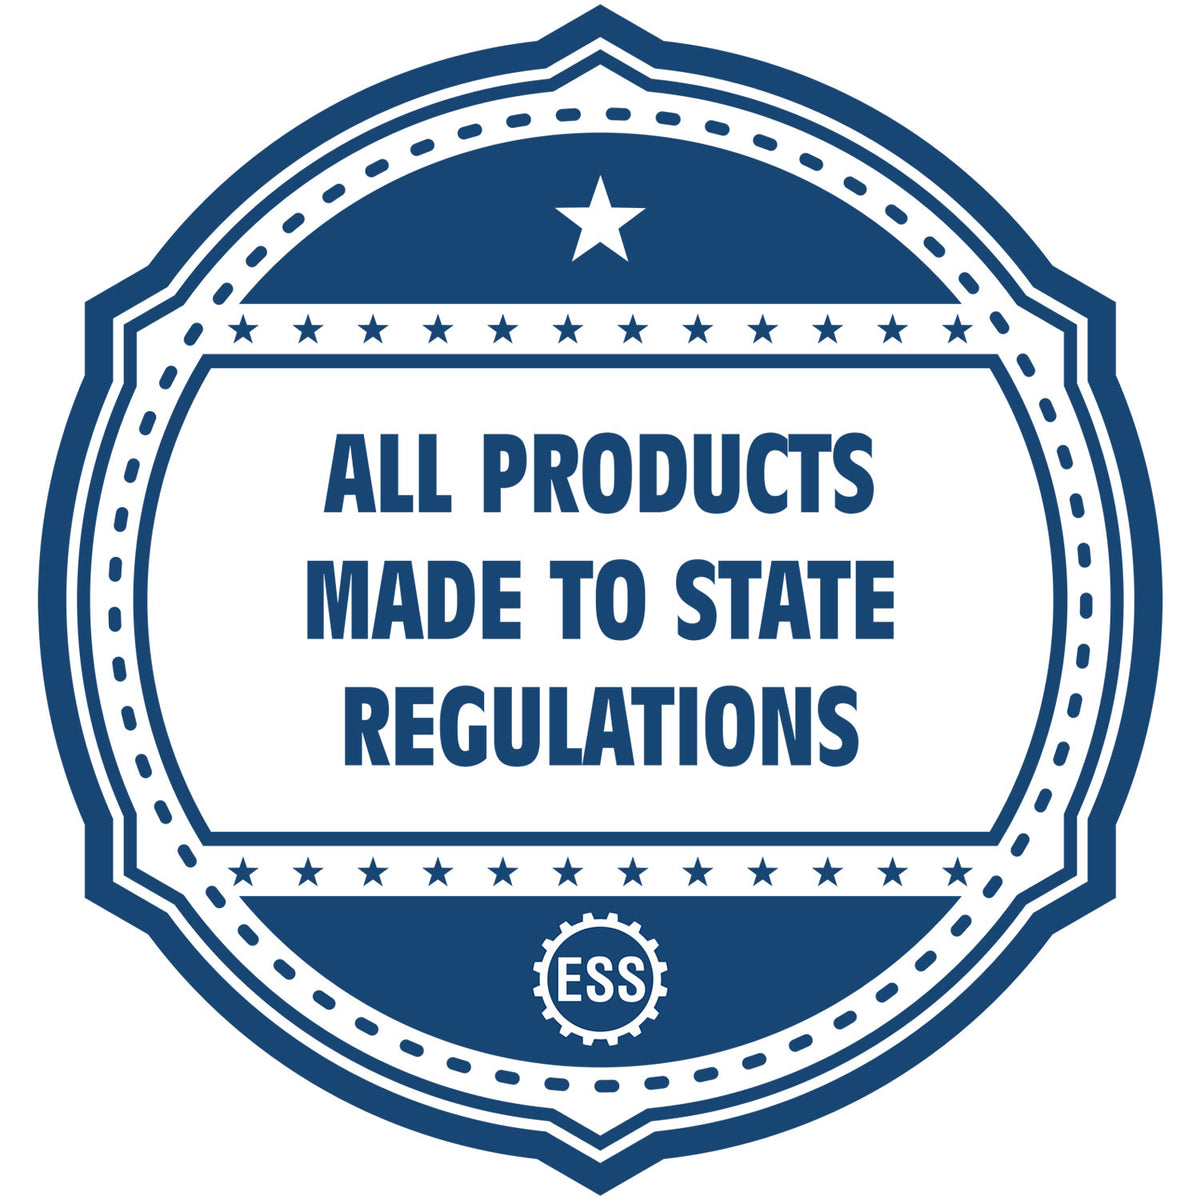 An icon or badge element for the State of Minnesota Long Reach Architectural Embossing Seal showing that this product is made in compliance with state regulations.